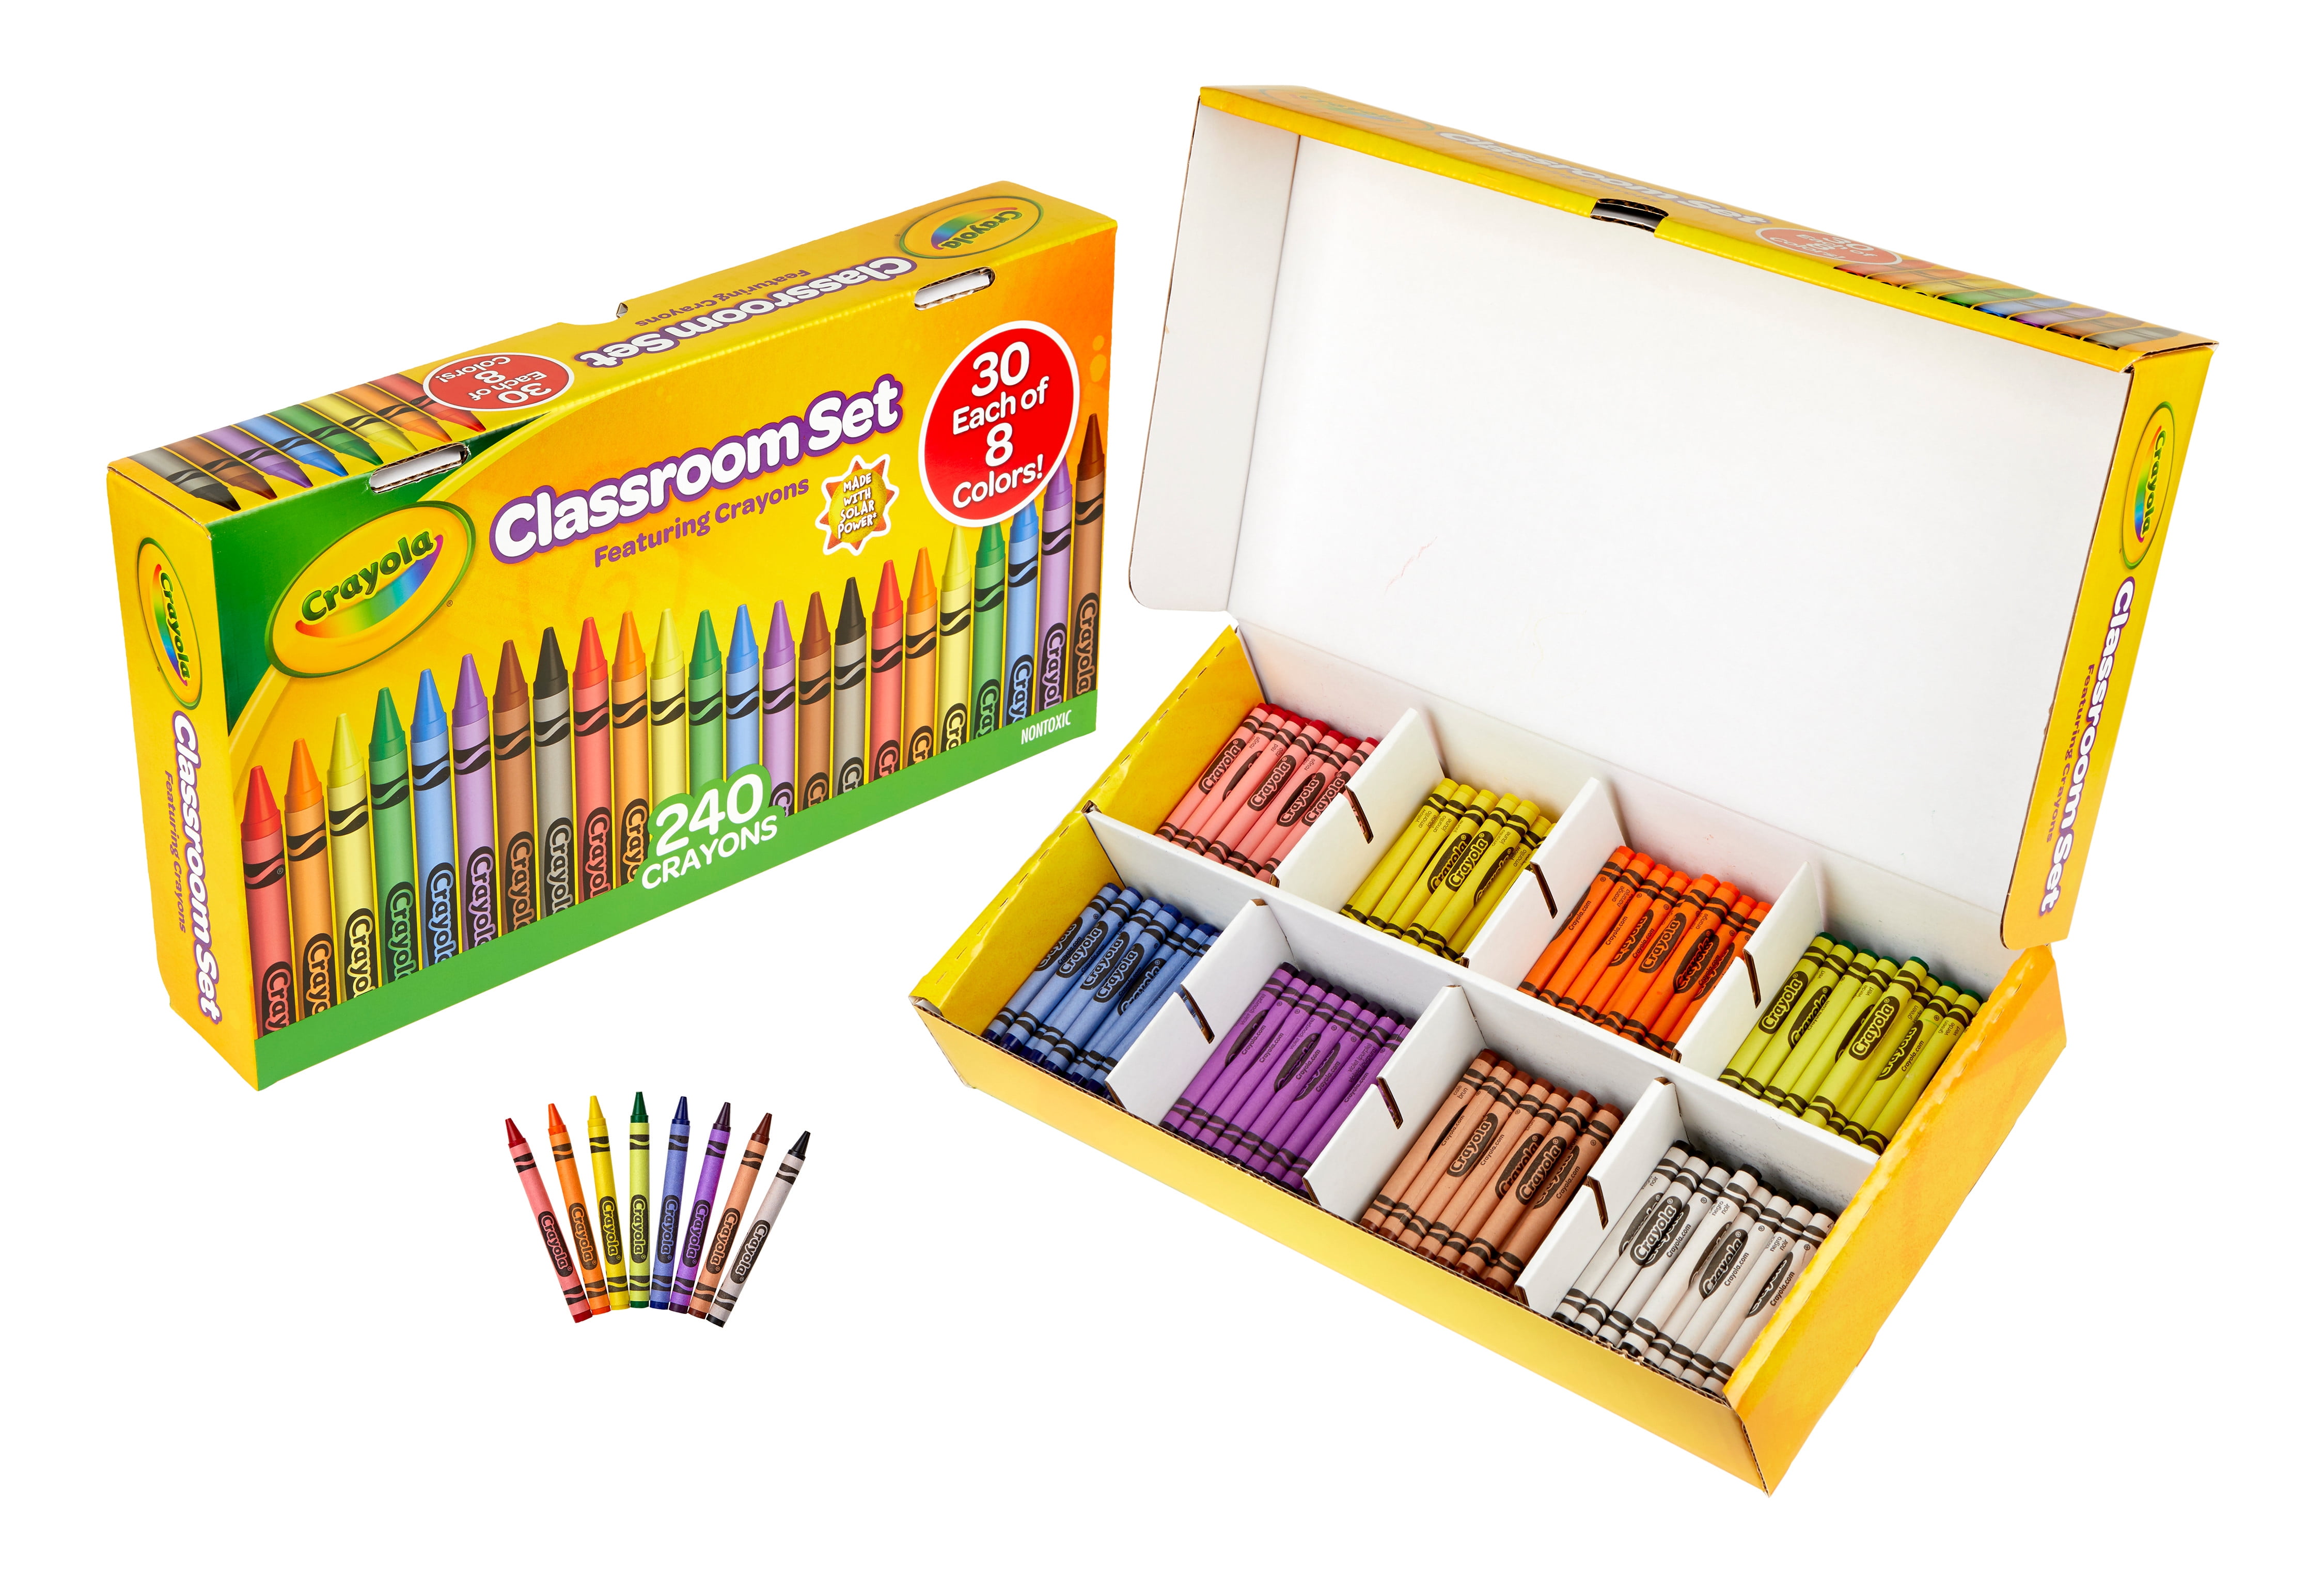  Crayola Crayon Tub - 120 Colors (240ct), Bulk Crayon Set for  Classrooms, Kids Coloring & Art Supplies, Resealable Storage, Ages 3+  [ Exclusive] : Everything Else